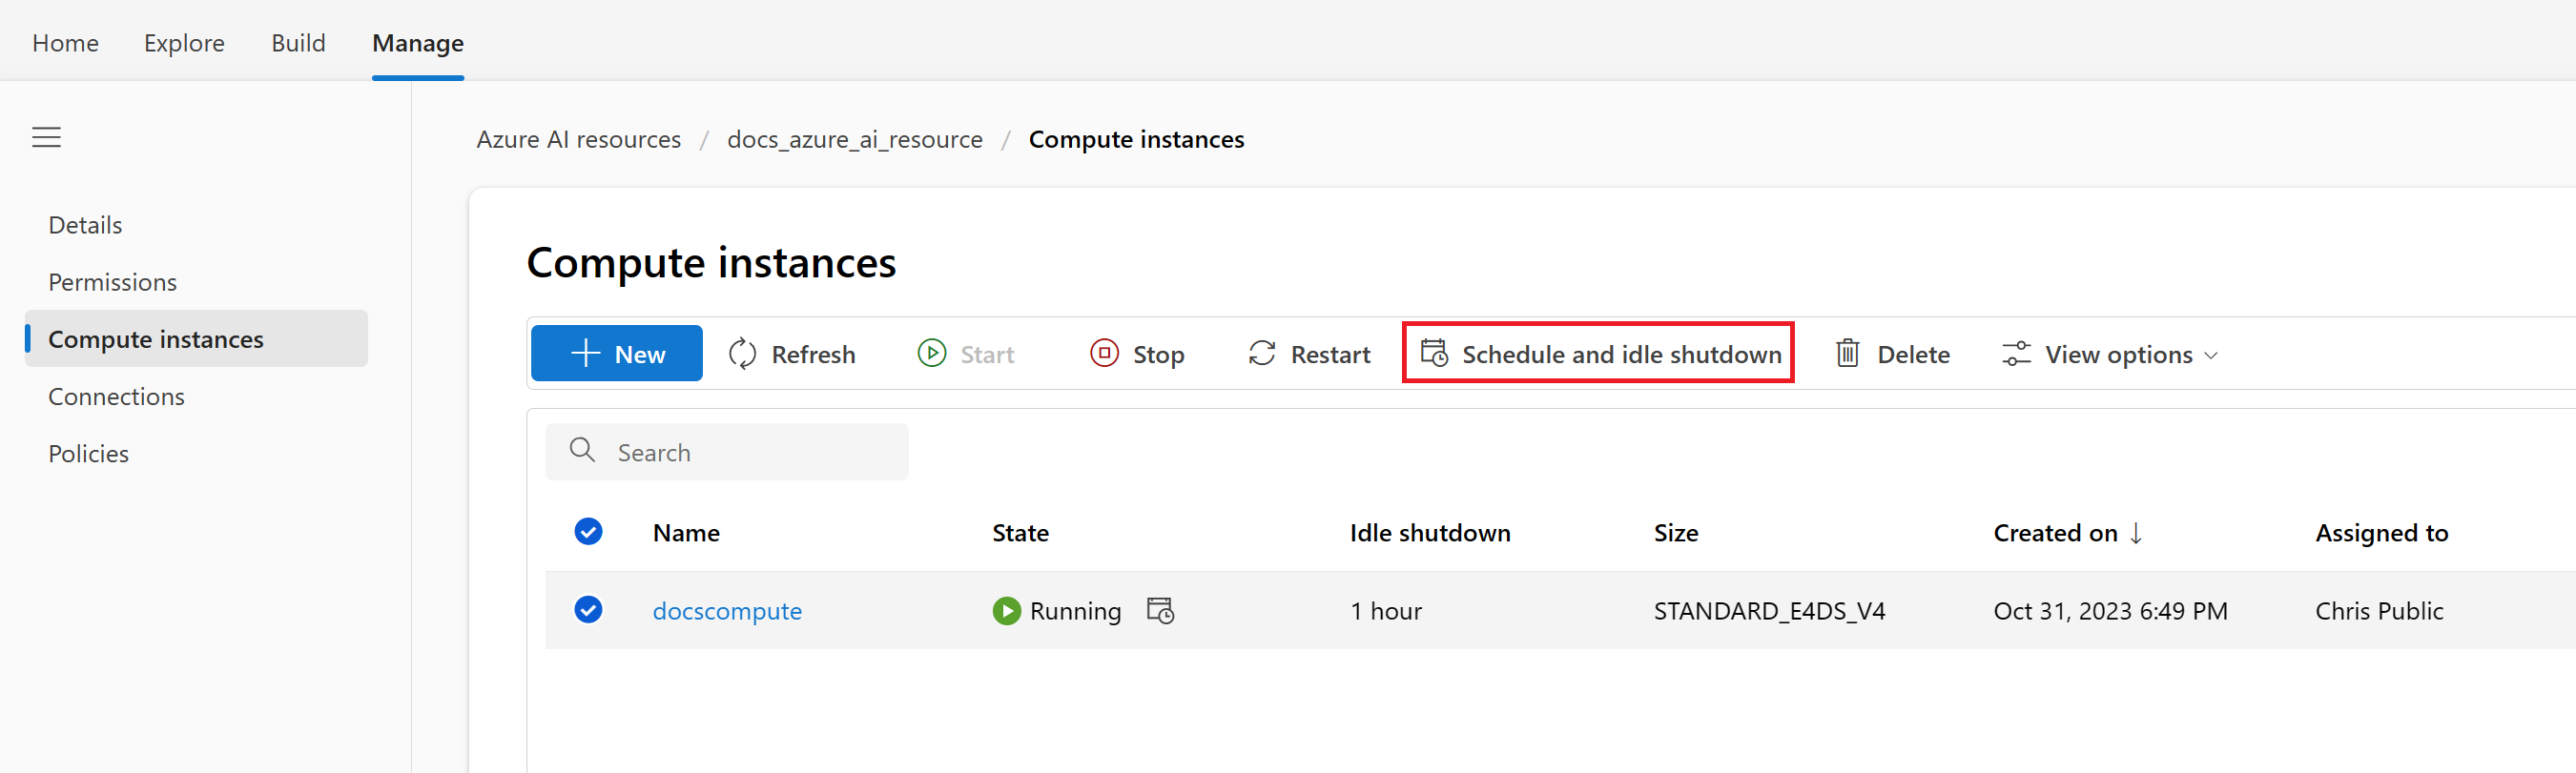 Screenshot of the option to change the idle shutdown schedule for a compute instance.